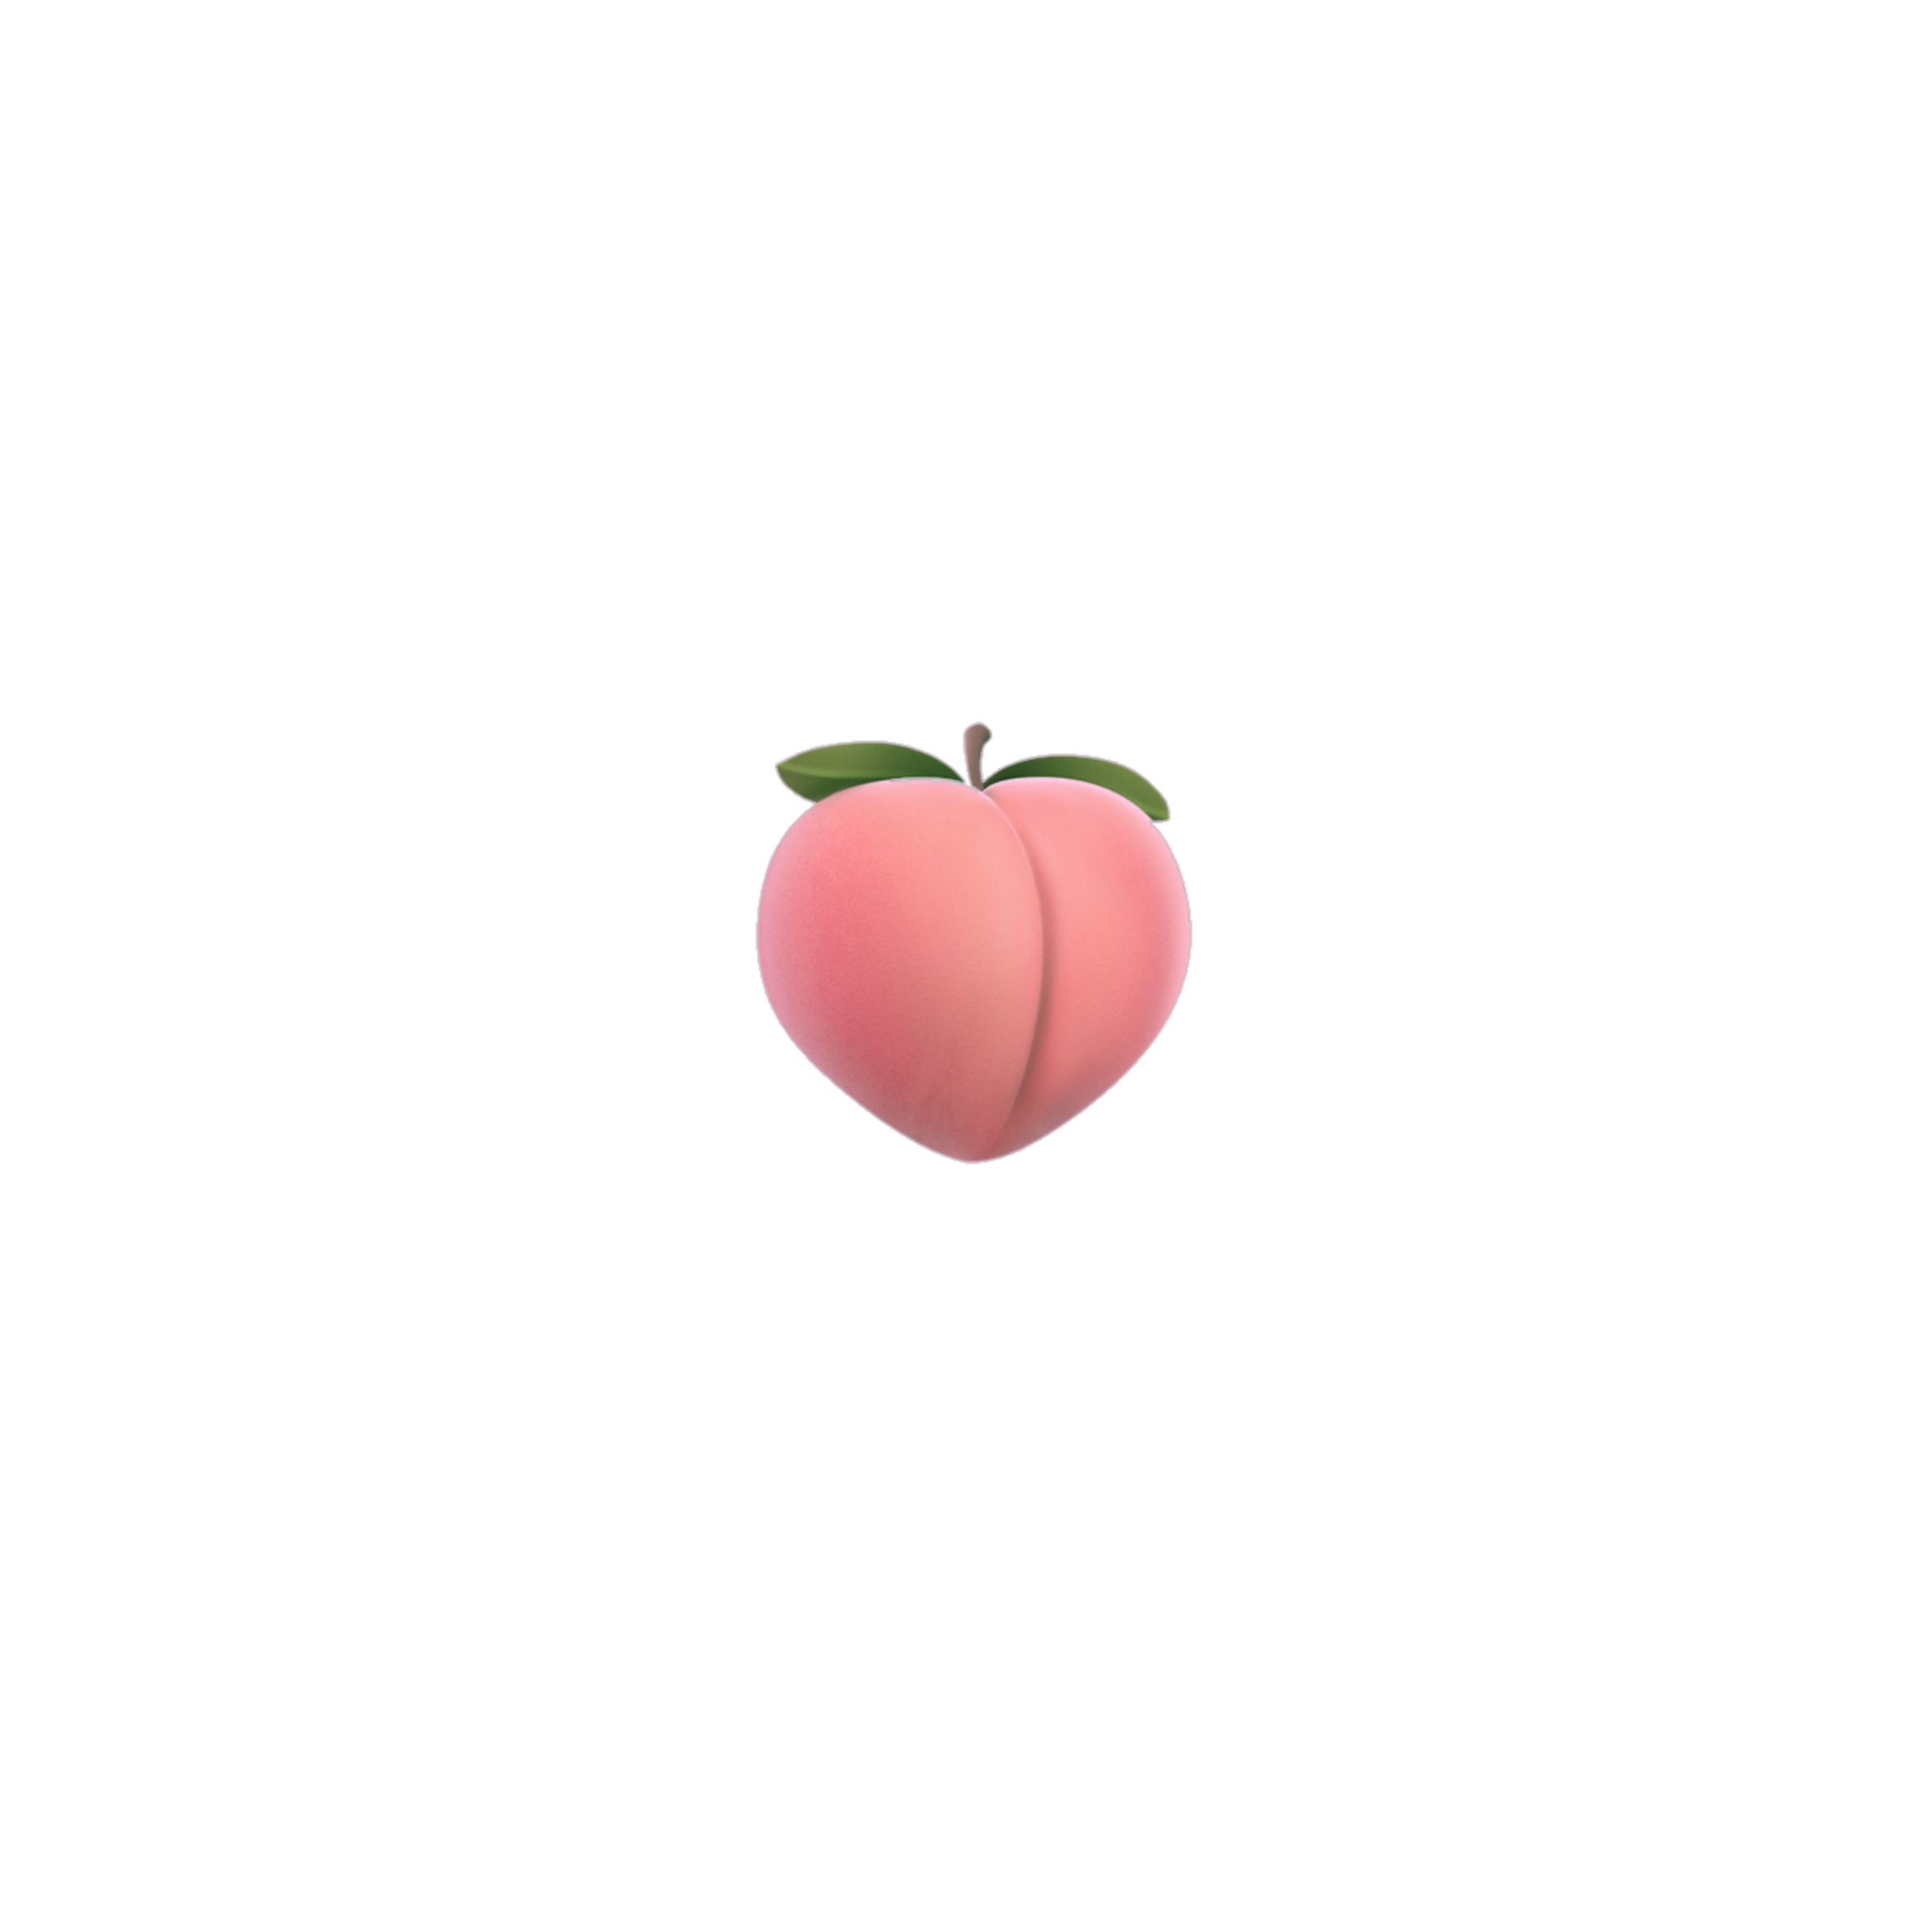 This visual is about aesthetic tumblr peach freetoedit #aesthetic #tumblr #peach...